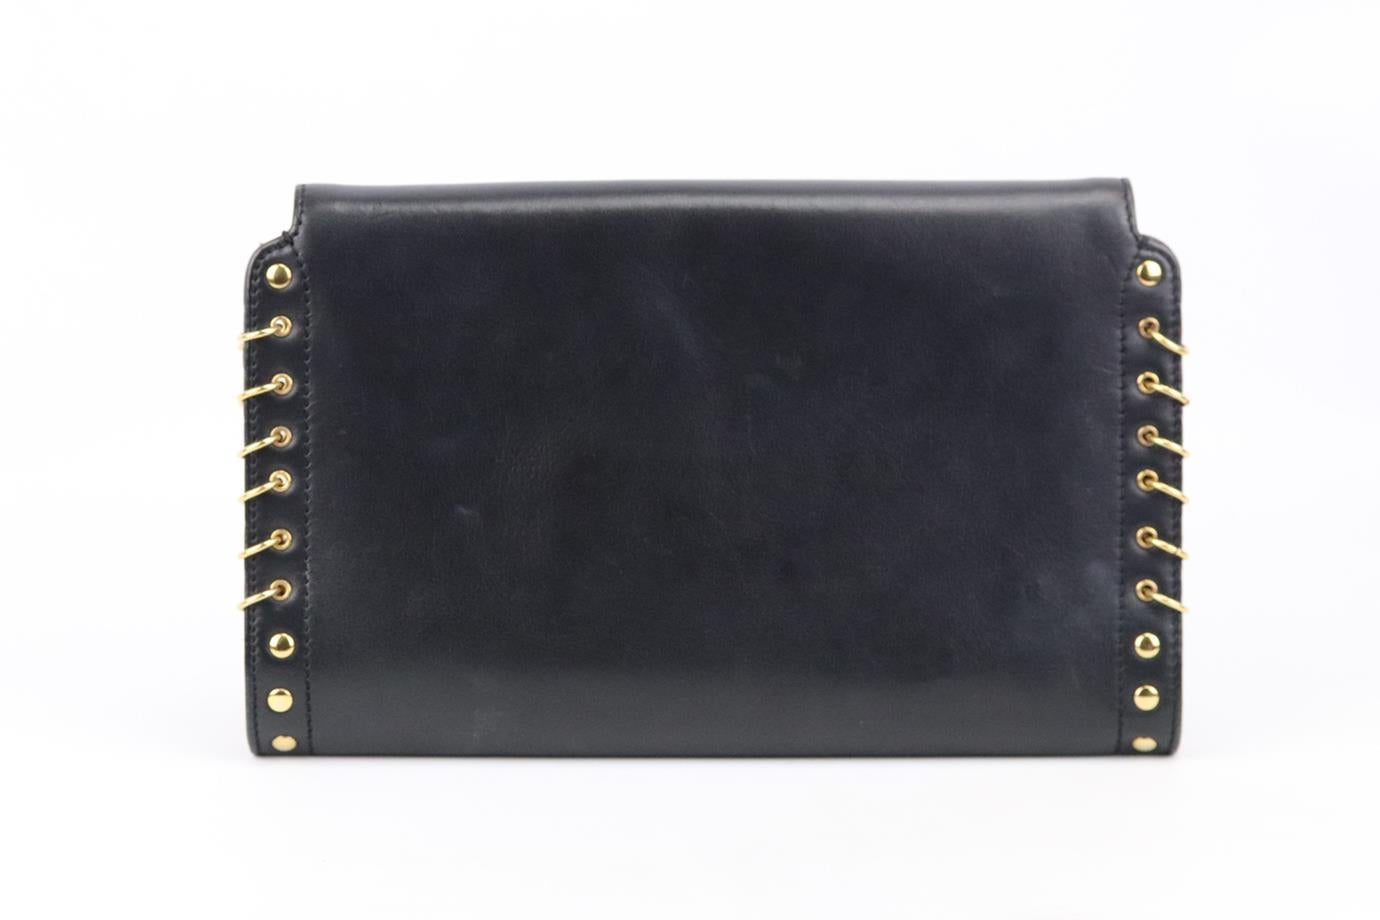 This shoulder bag by Emilio Pucci can be worn cross-body, over the shoulder or as a clutch thanks to the detachable chain strap, it's crafted from smooth black leather in a slim shape and has embellishment detail down the sides. Black leather. Twist